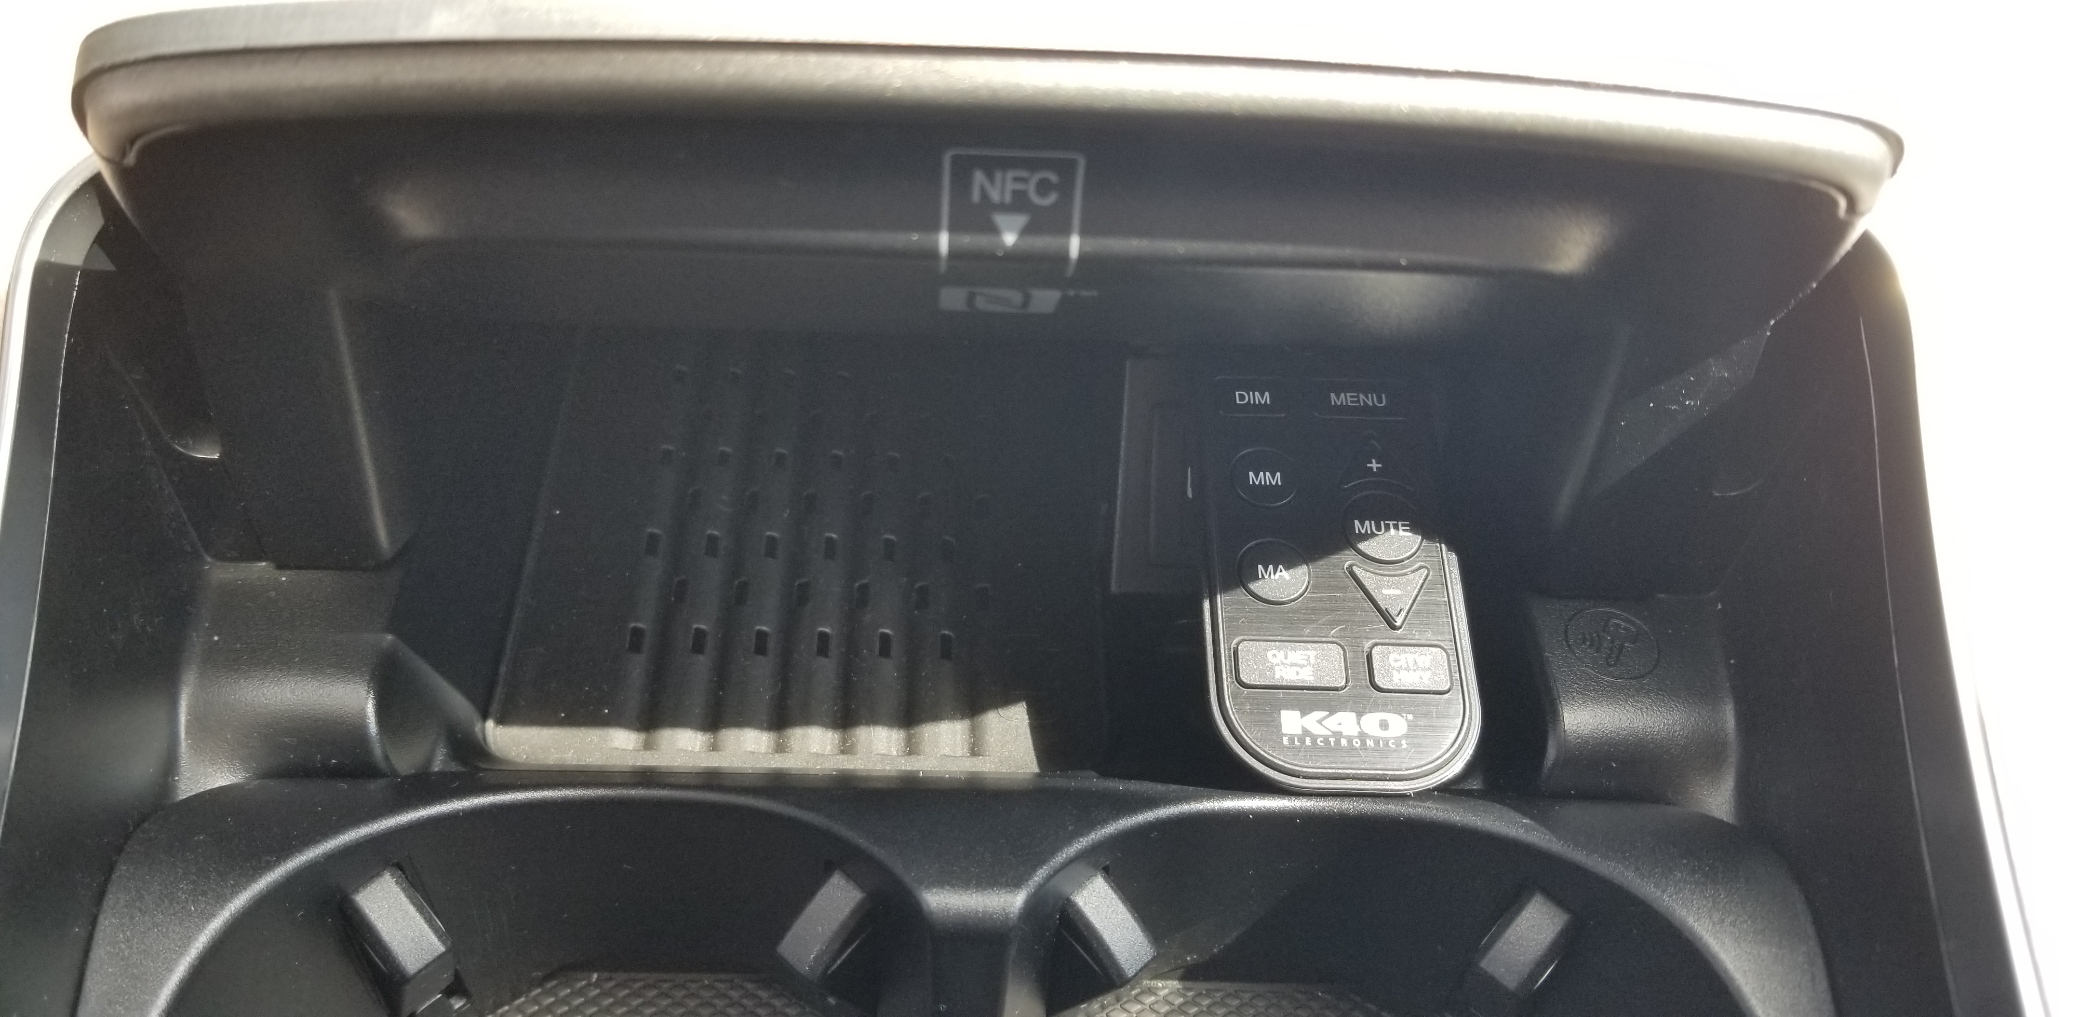 K40 radar detector and police laser jammer remote control in a 2019 Mercedes Benz CLS53 AMG in Sayville, NY